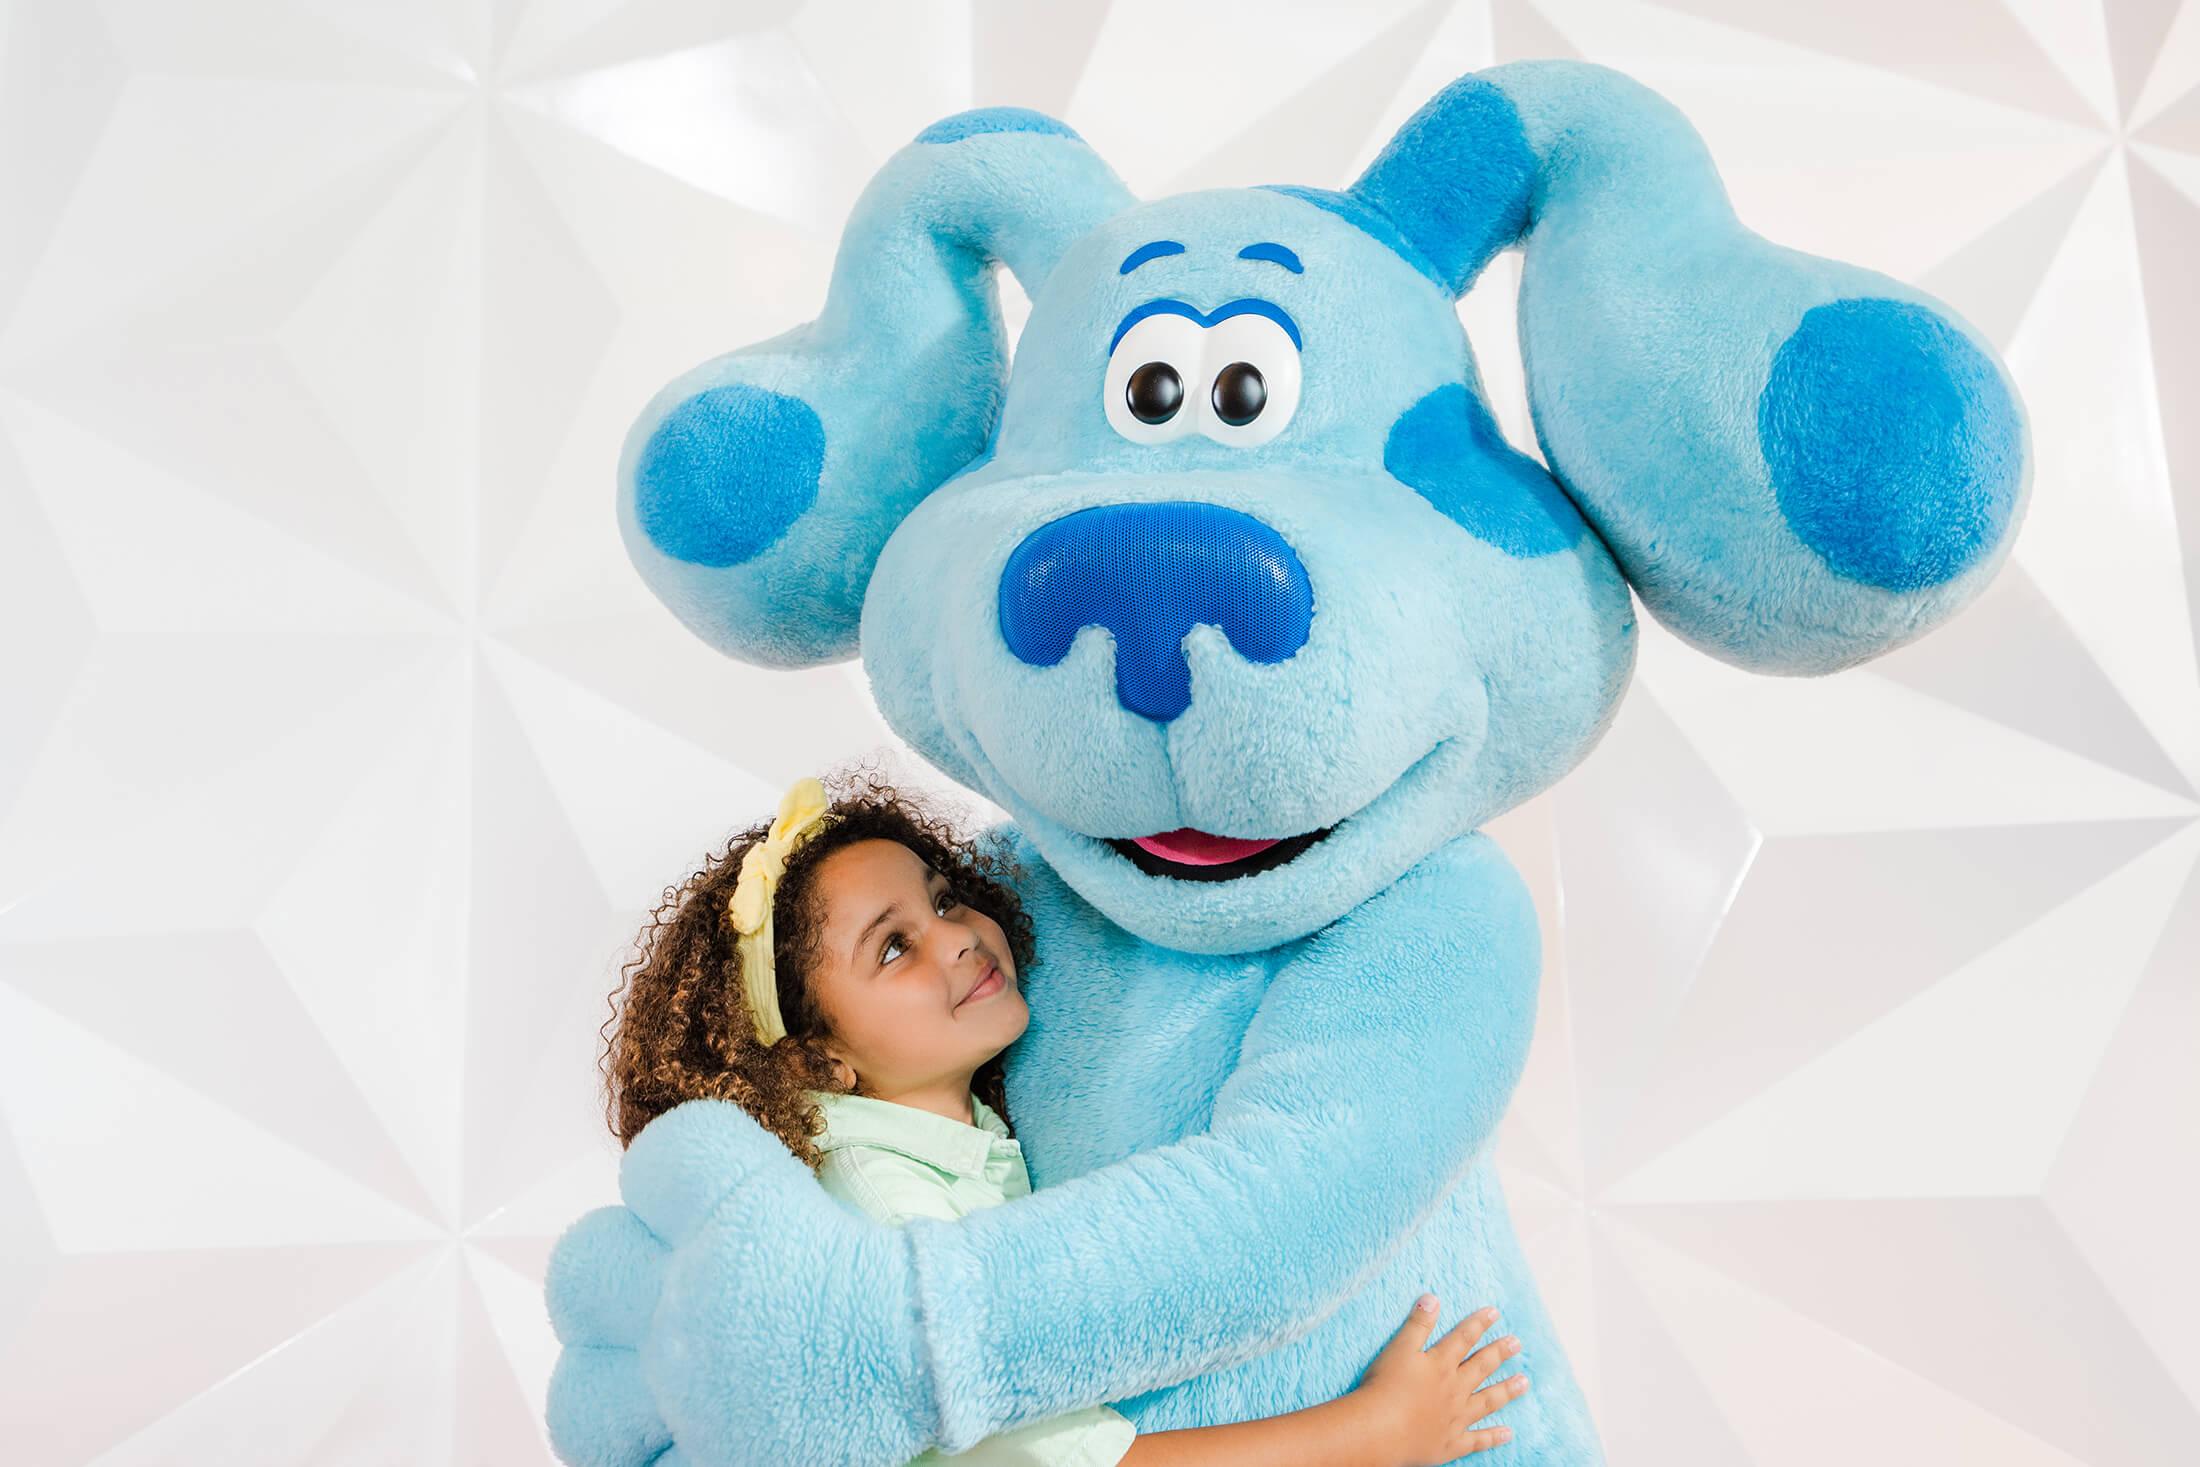 A toddler snuggles with a Blue mascot